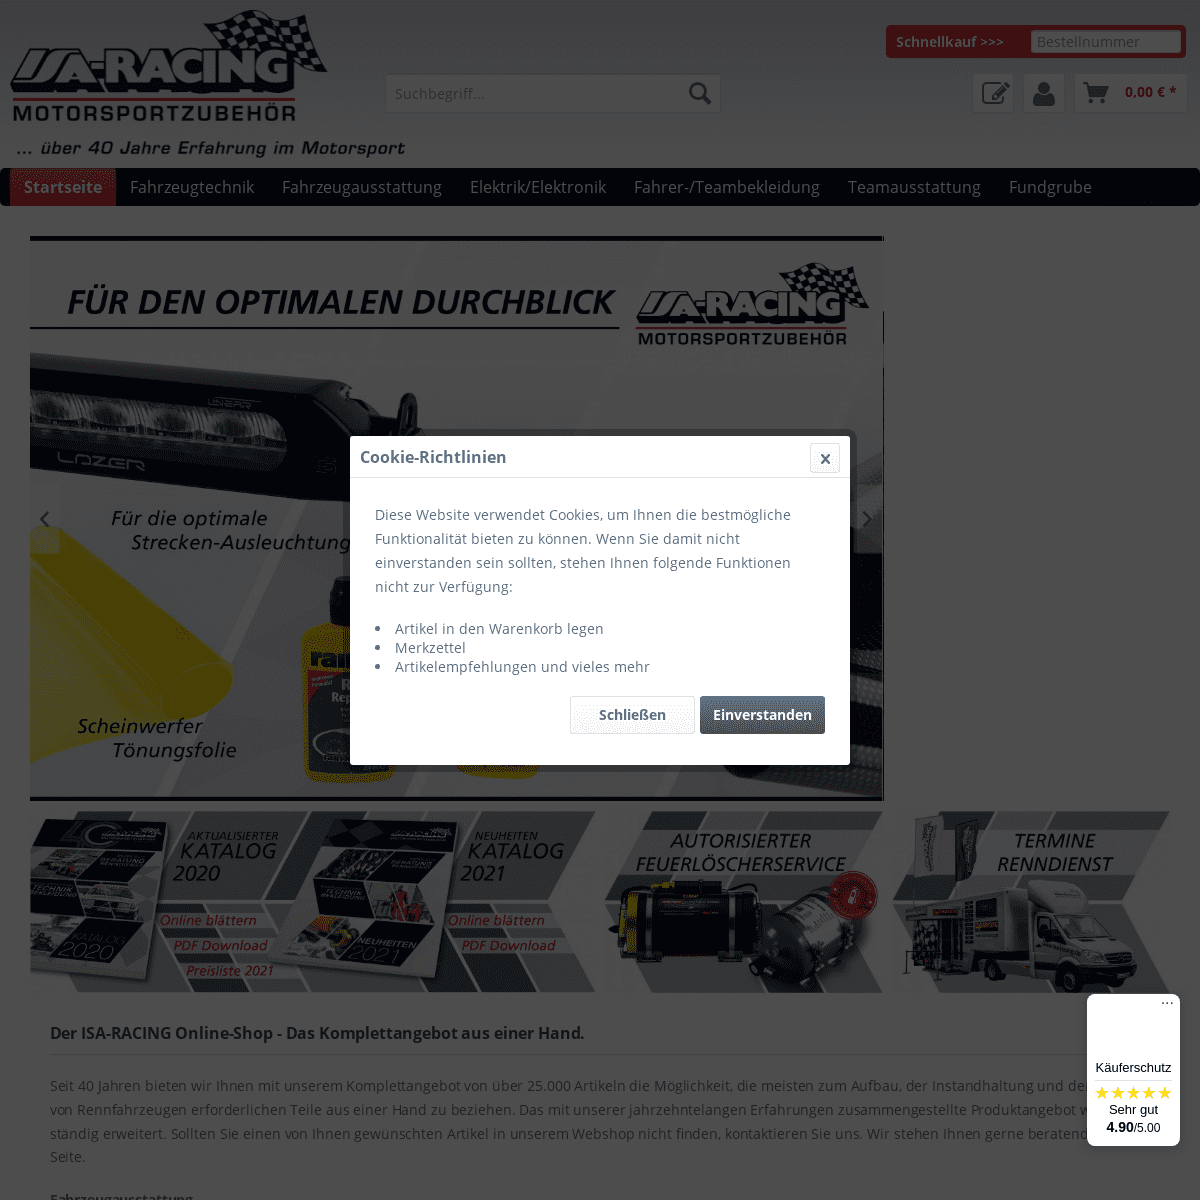 A complete backup of https://isa-racing.com